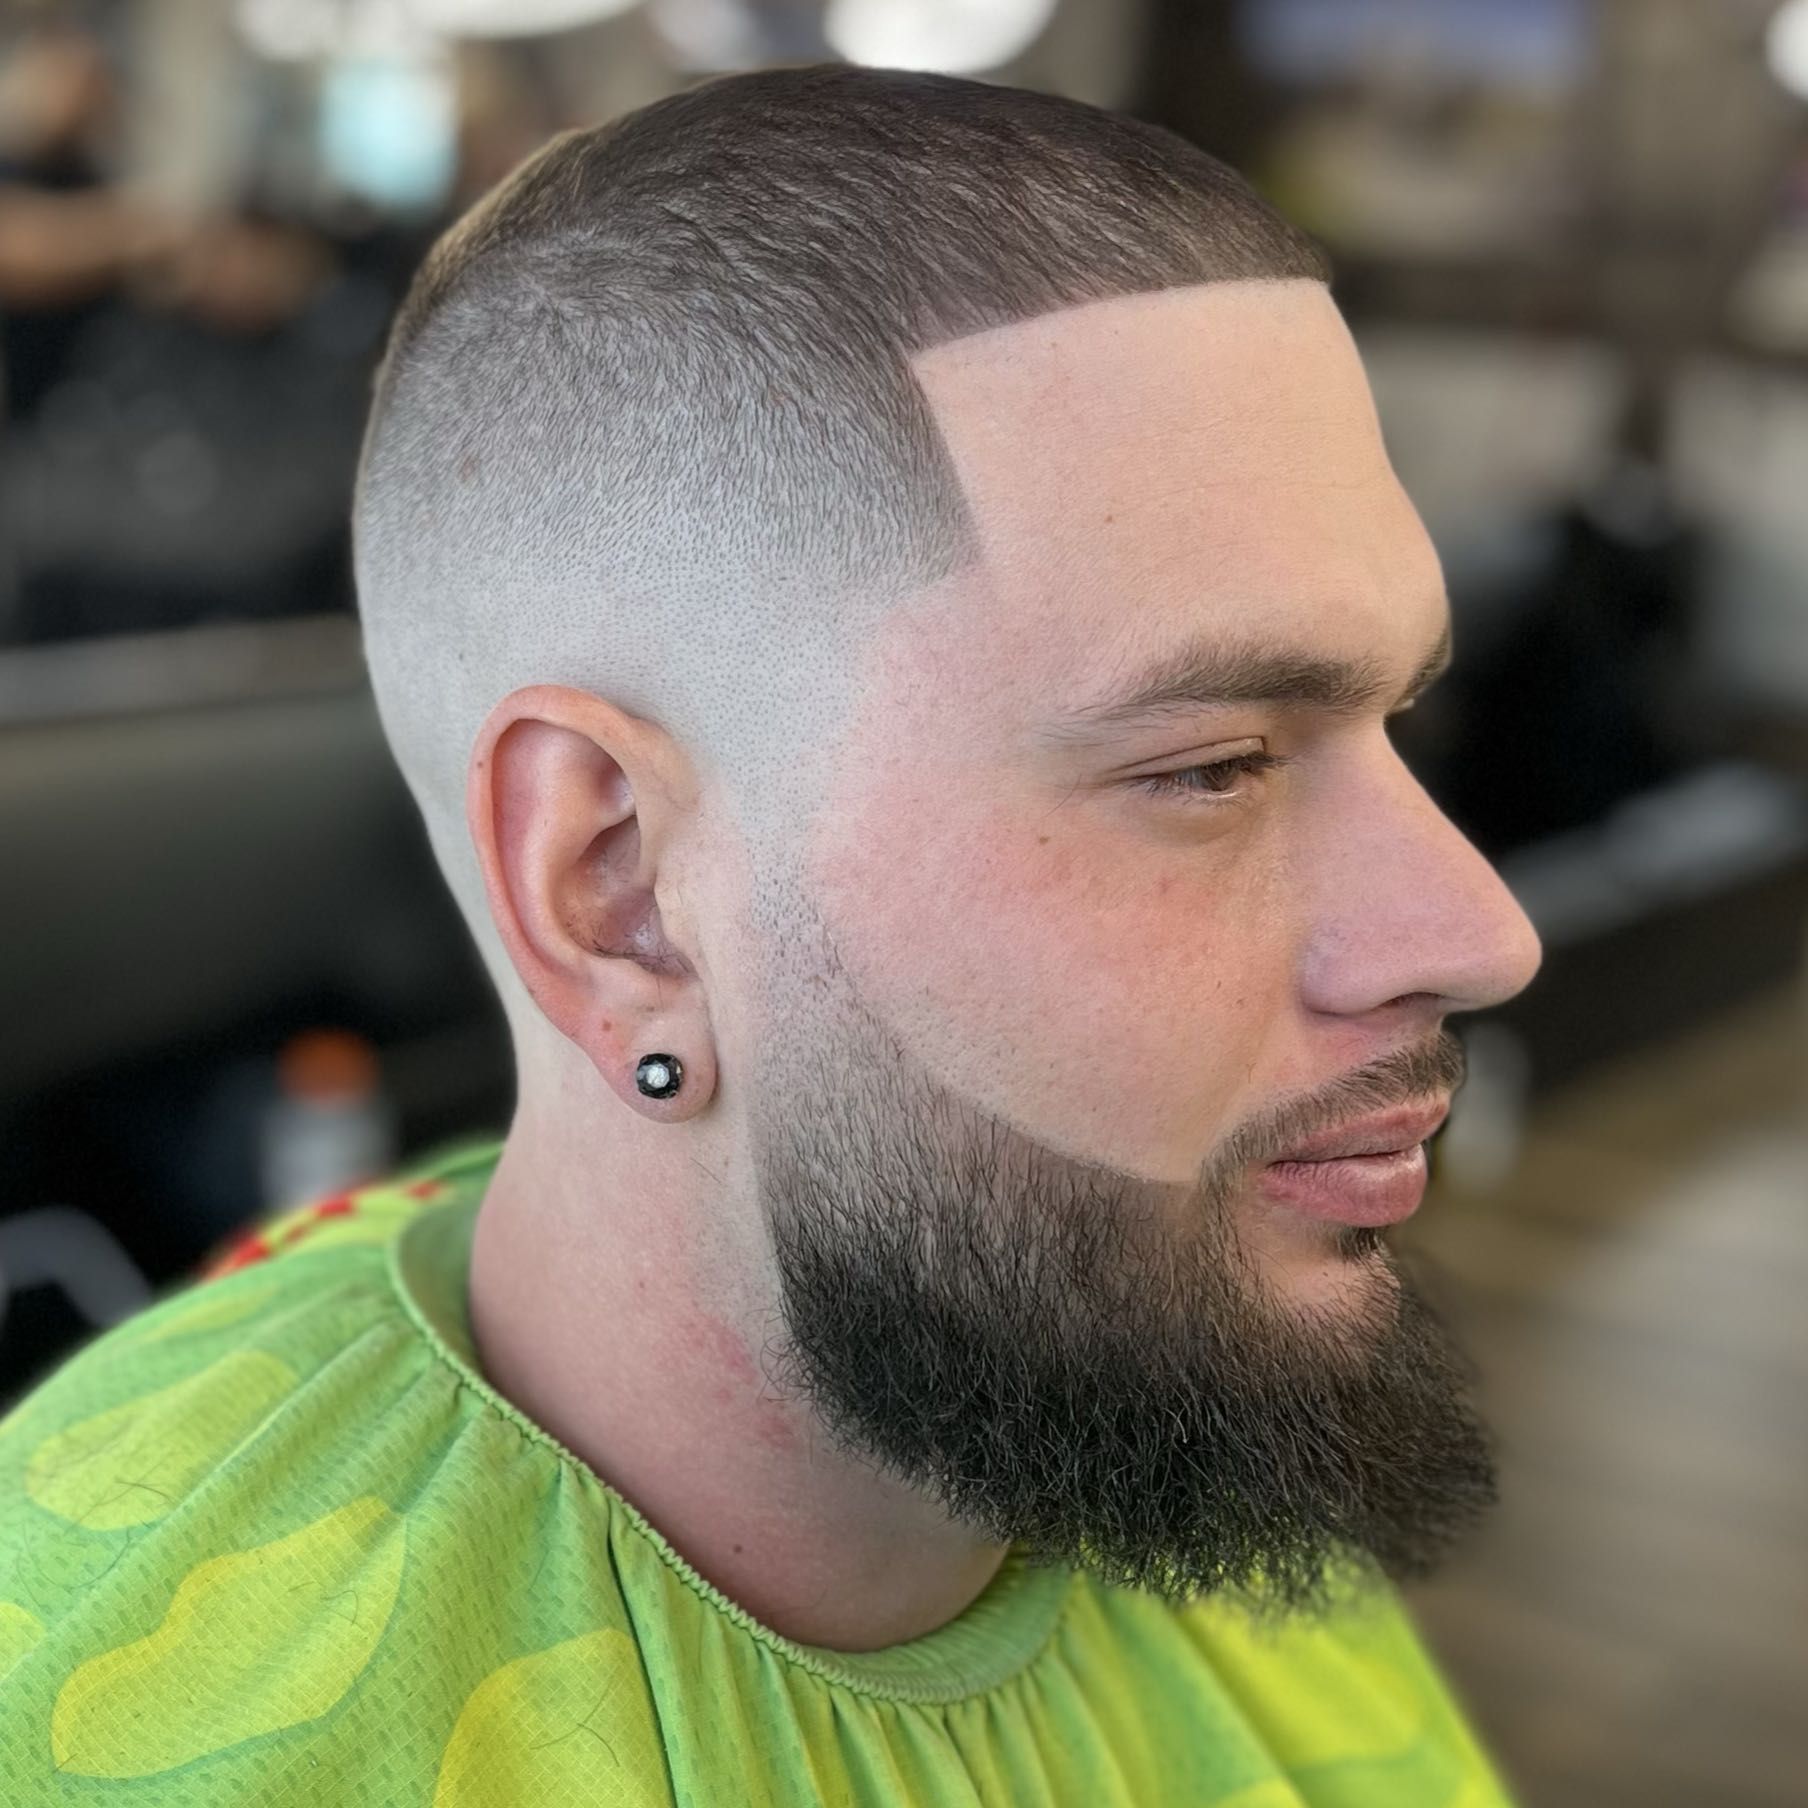 A Barbers Touch, 500 w 84th ave, Unit 4, Denver, 80260